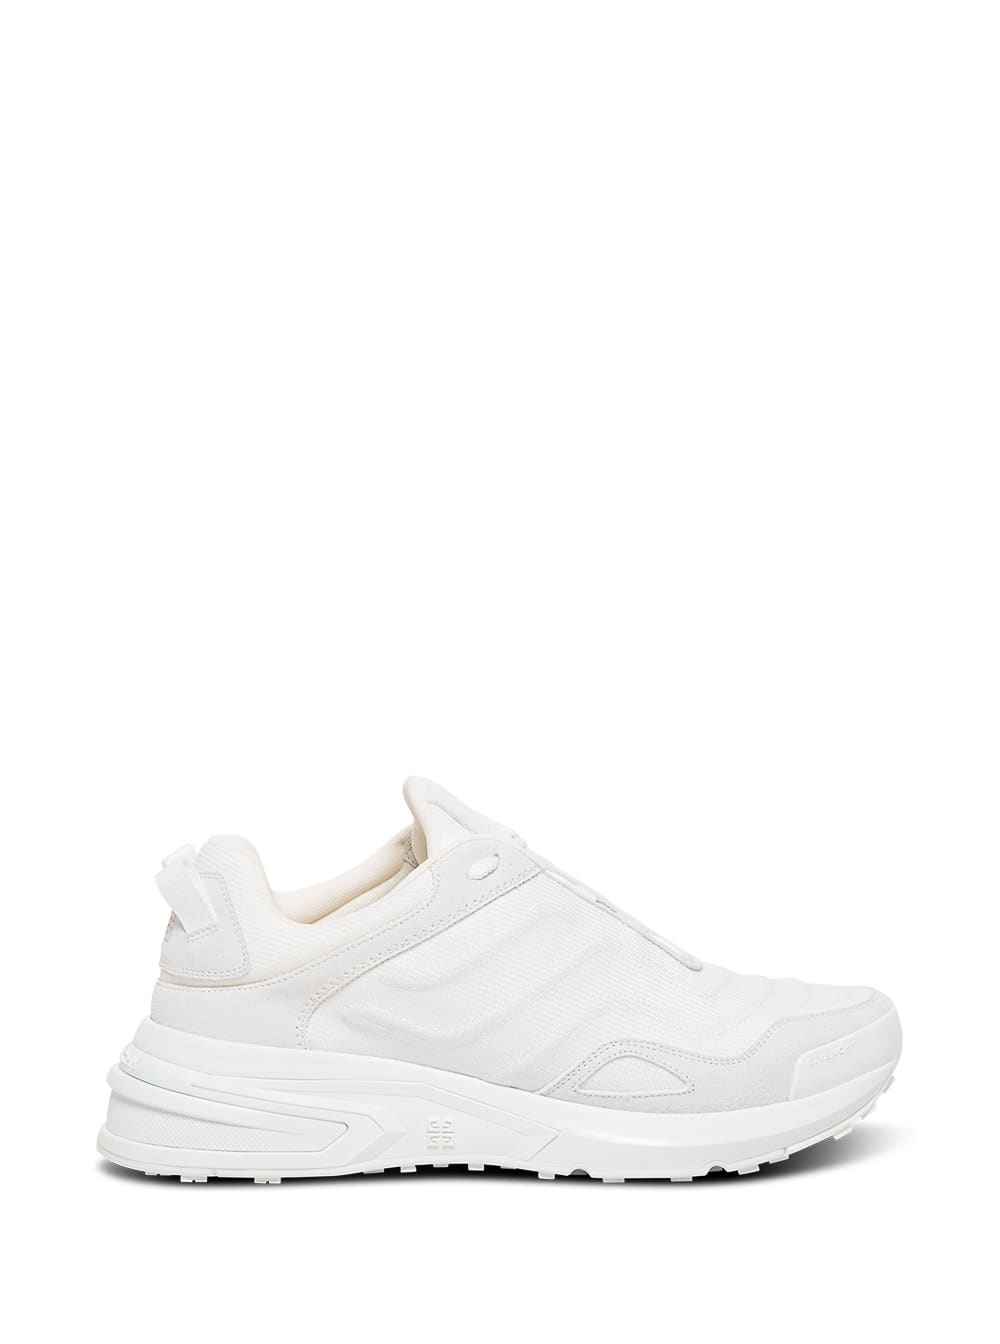 Givenchy Giv 1 Light Sneakers In Canvas And Leather